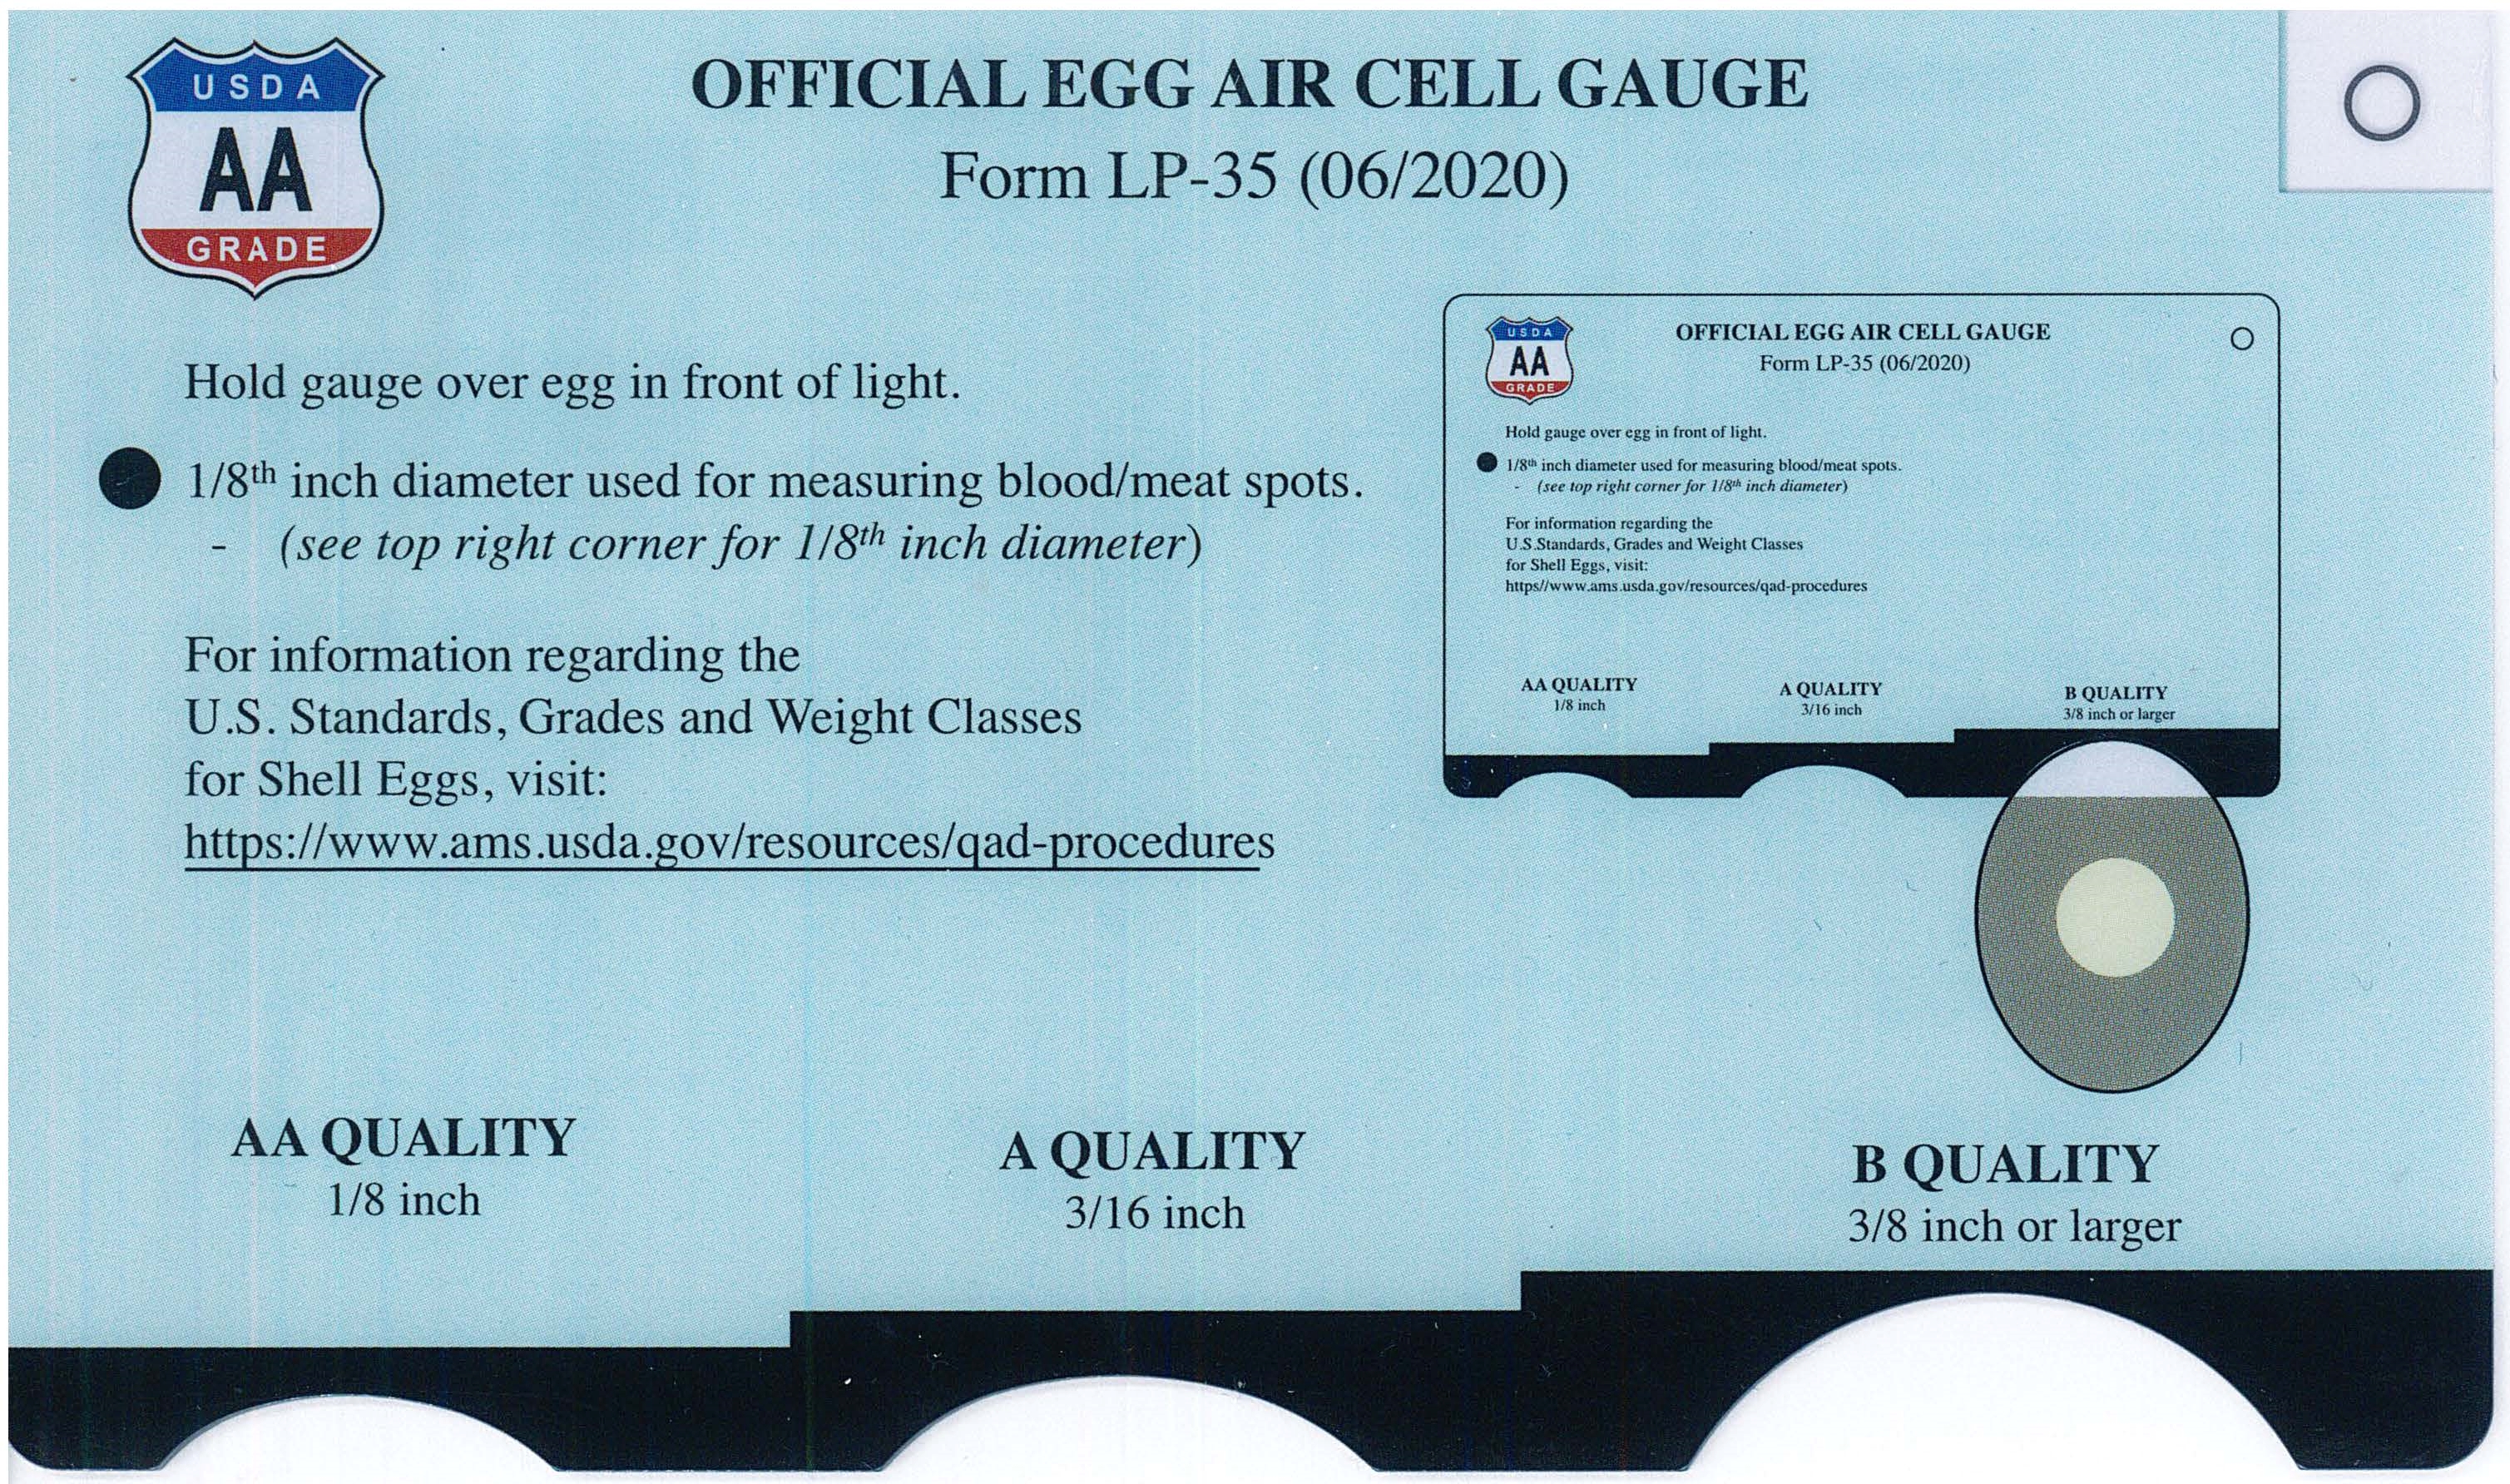 Official USDA Egg Air Cell Gauge used to determine egg grades